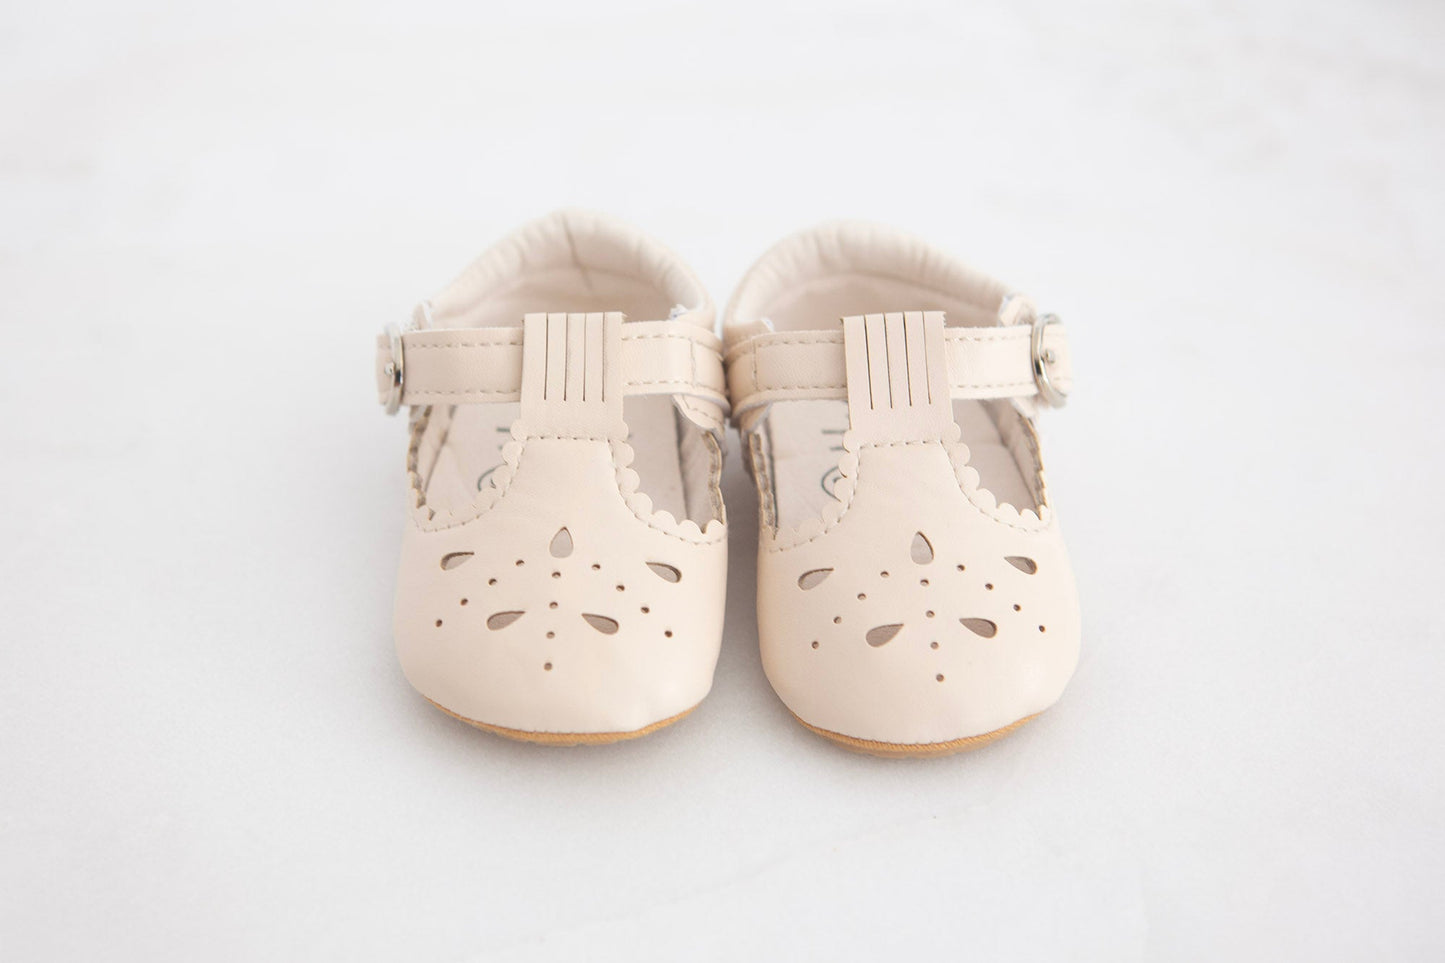 Mary Jane Baby Shoes - Cream, Sand or Black - Cheerful Lane